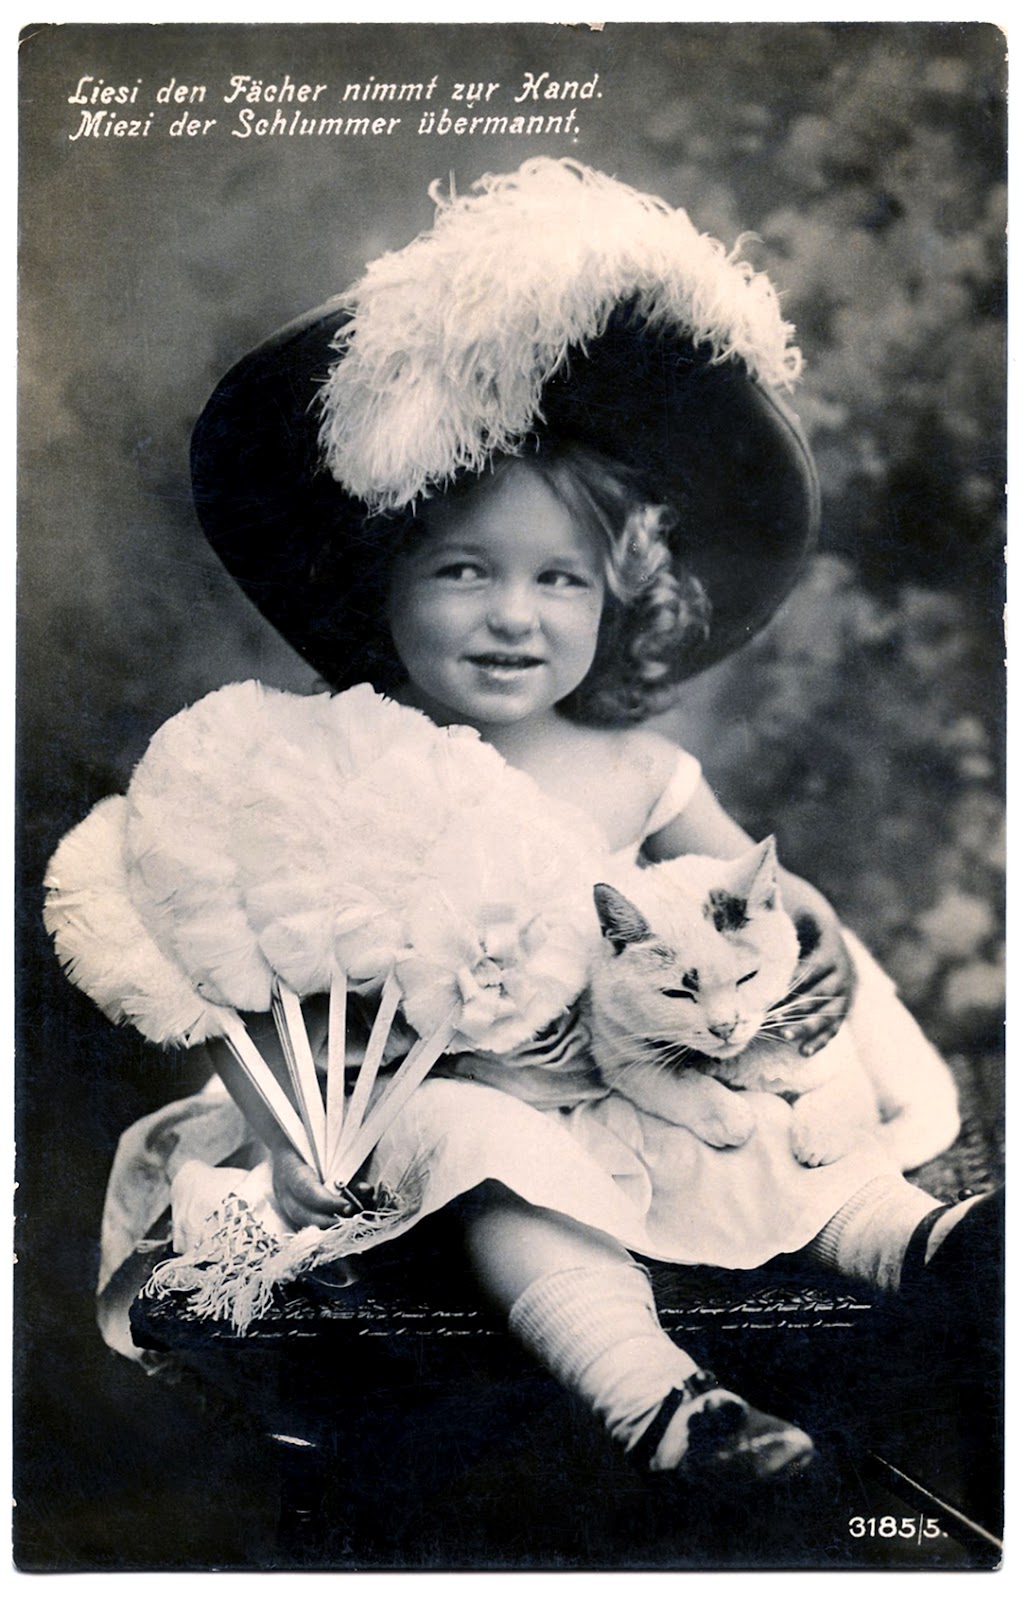 Old Photo - Cute Little Girl with Big Hat Cat - The 